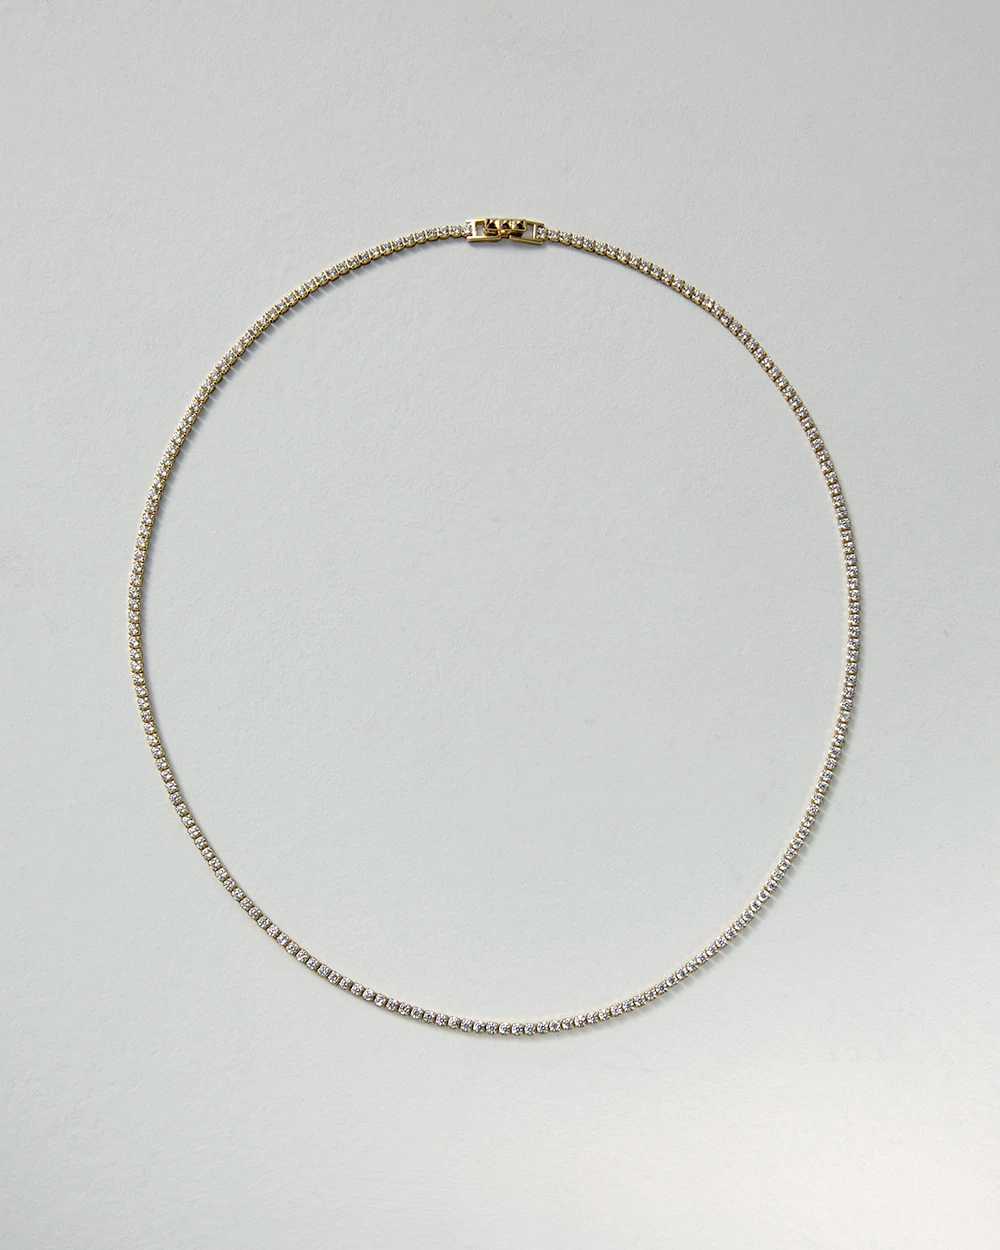 Gold Crystal Tennis Necklace